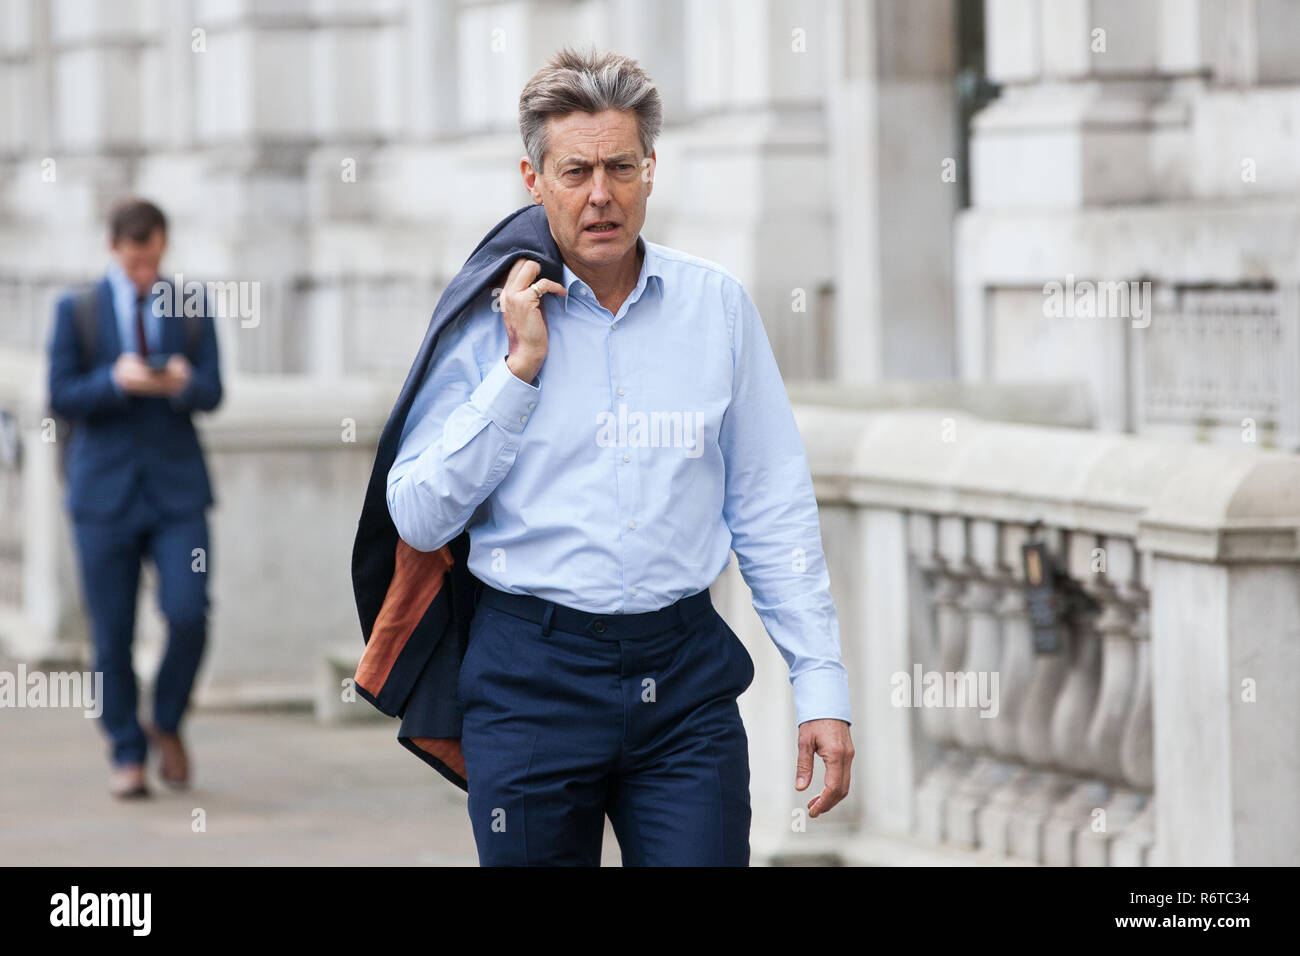 London, UK. 6th December, 2018. Ben Bradshaw, Labour MP for Exeter, arrives for a Privy Council meeting at the Cabinet Office. Credit: Mark Kerrison/Alamy Live News Stock Photo